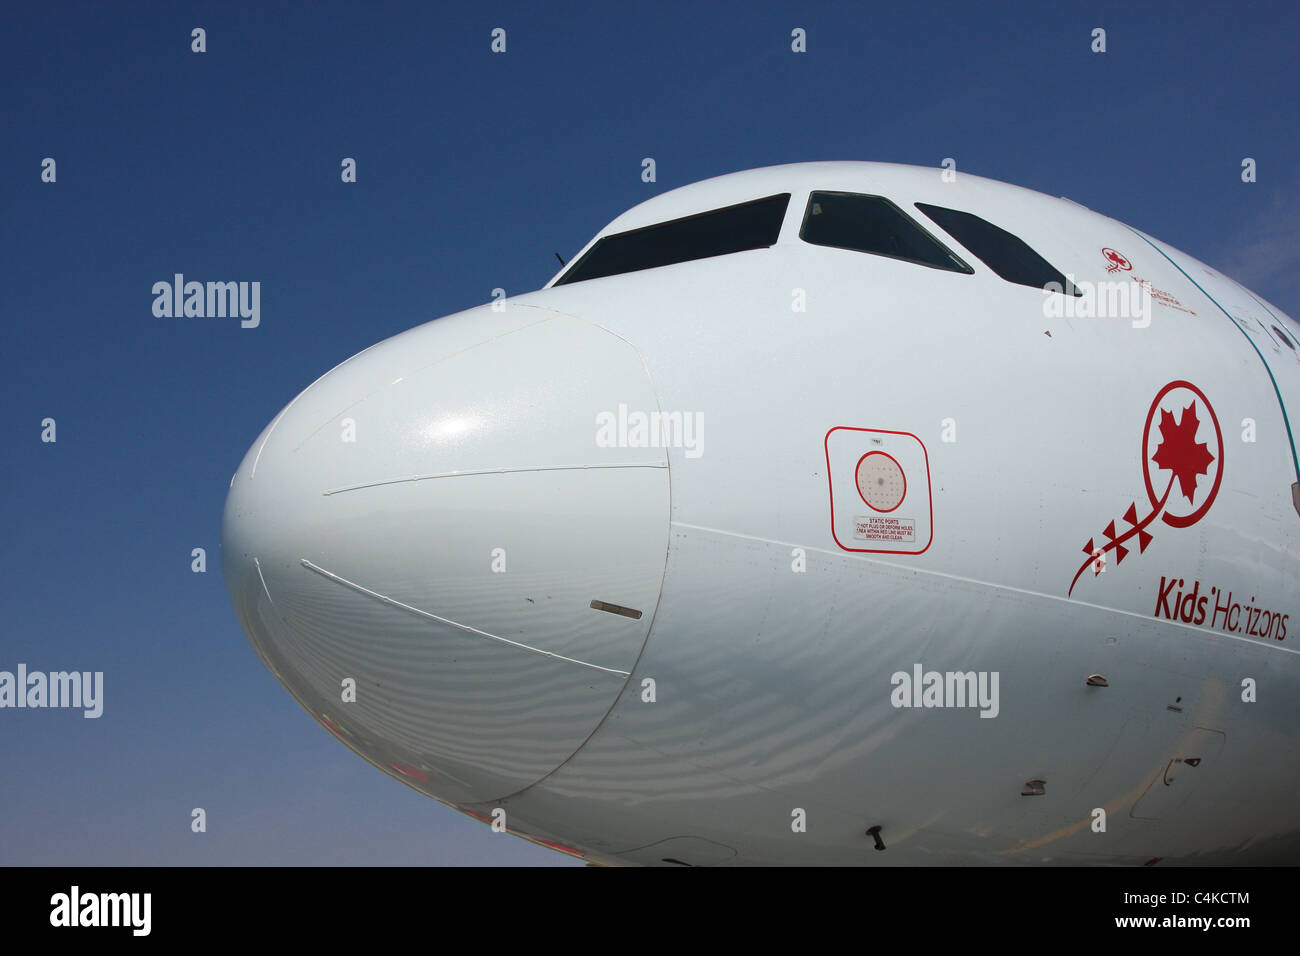 aircraft airplane front exterior airbus Stock Photo